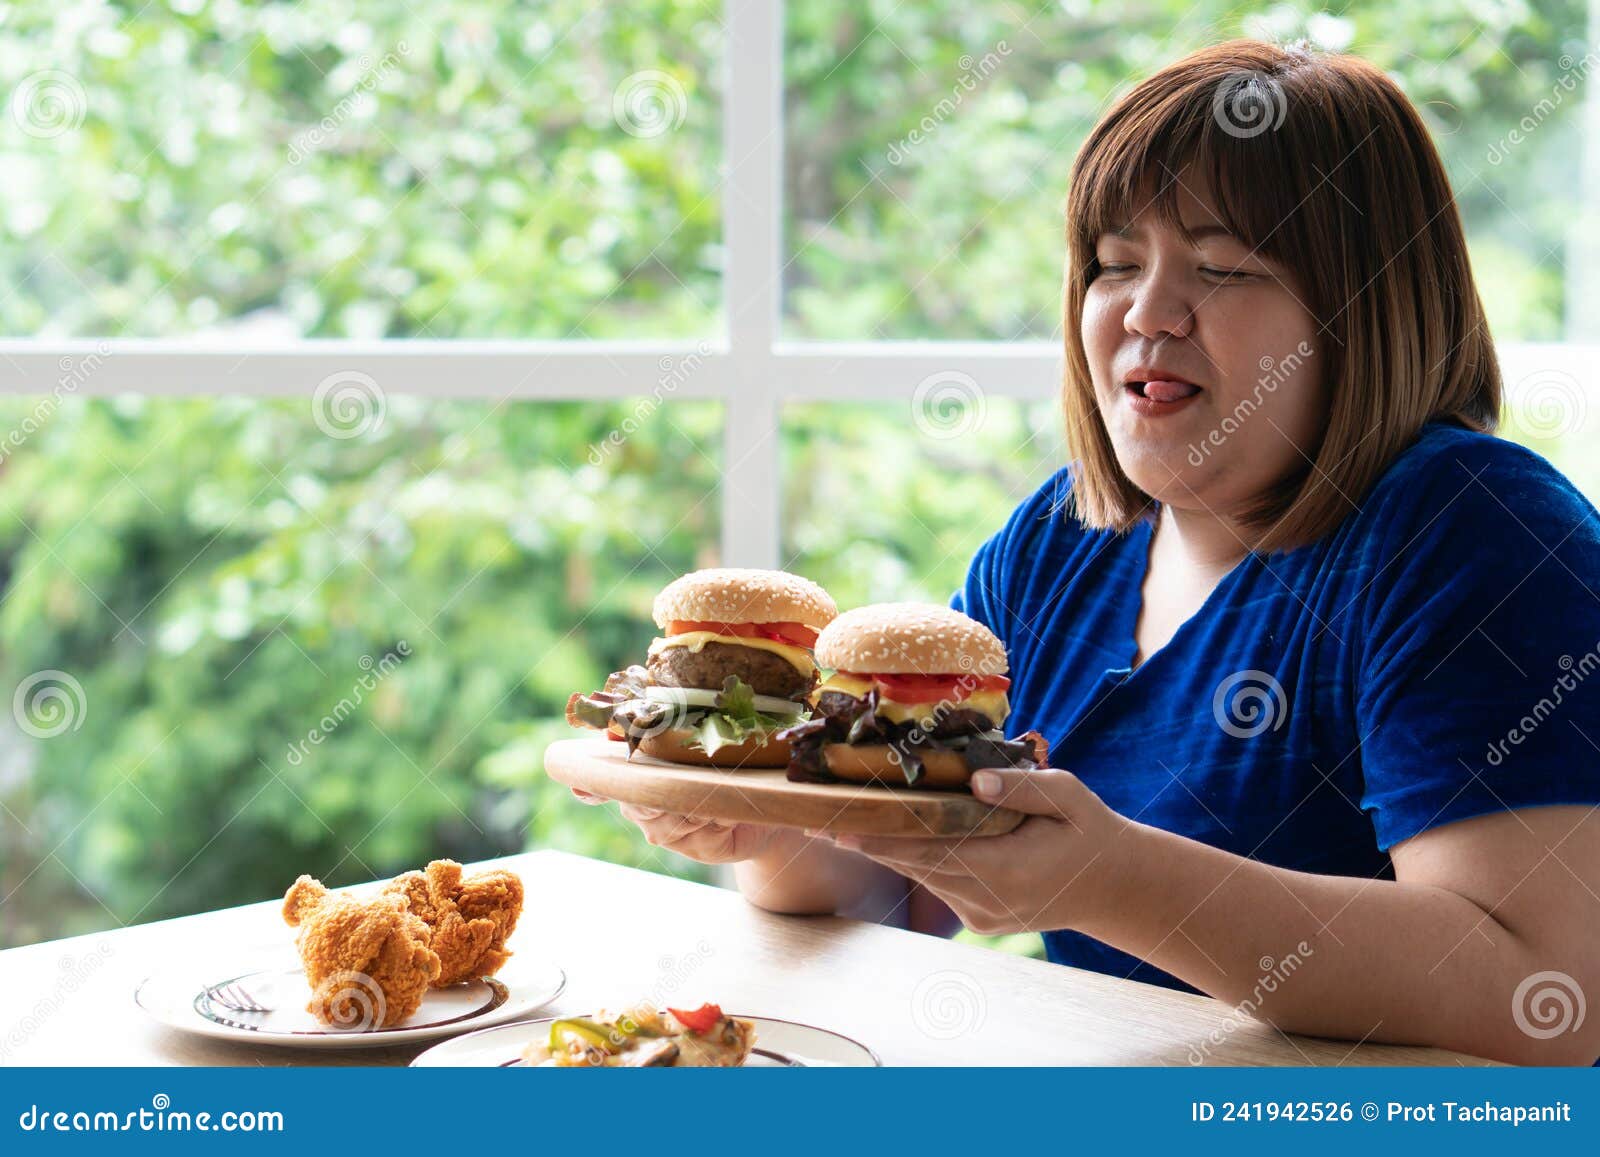 Hungry Overweight Woman Holding Hamburger On A Wooden Plate Fried Chicken And Pizza On Table